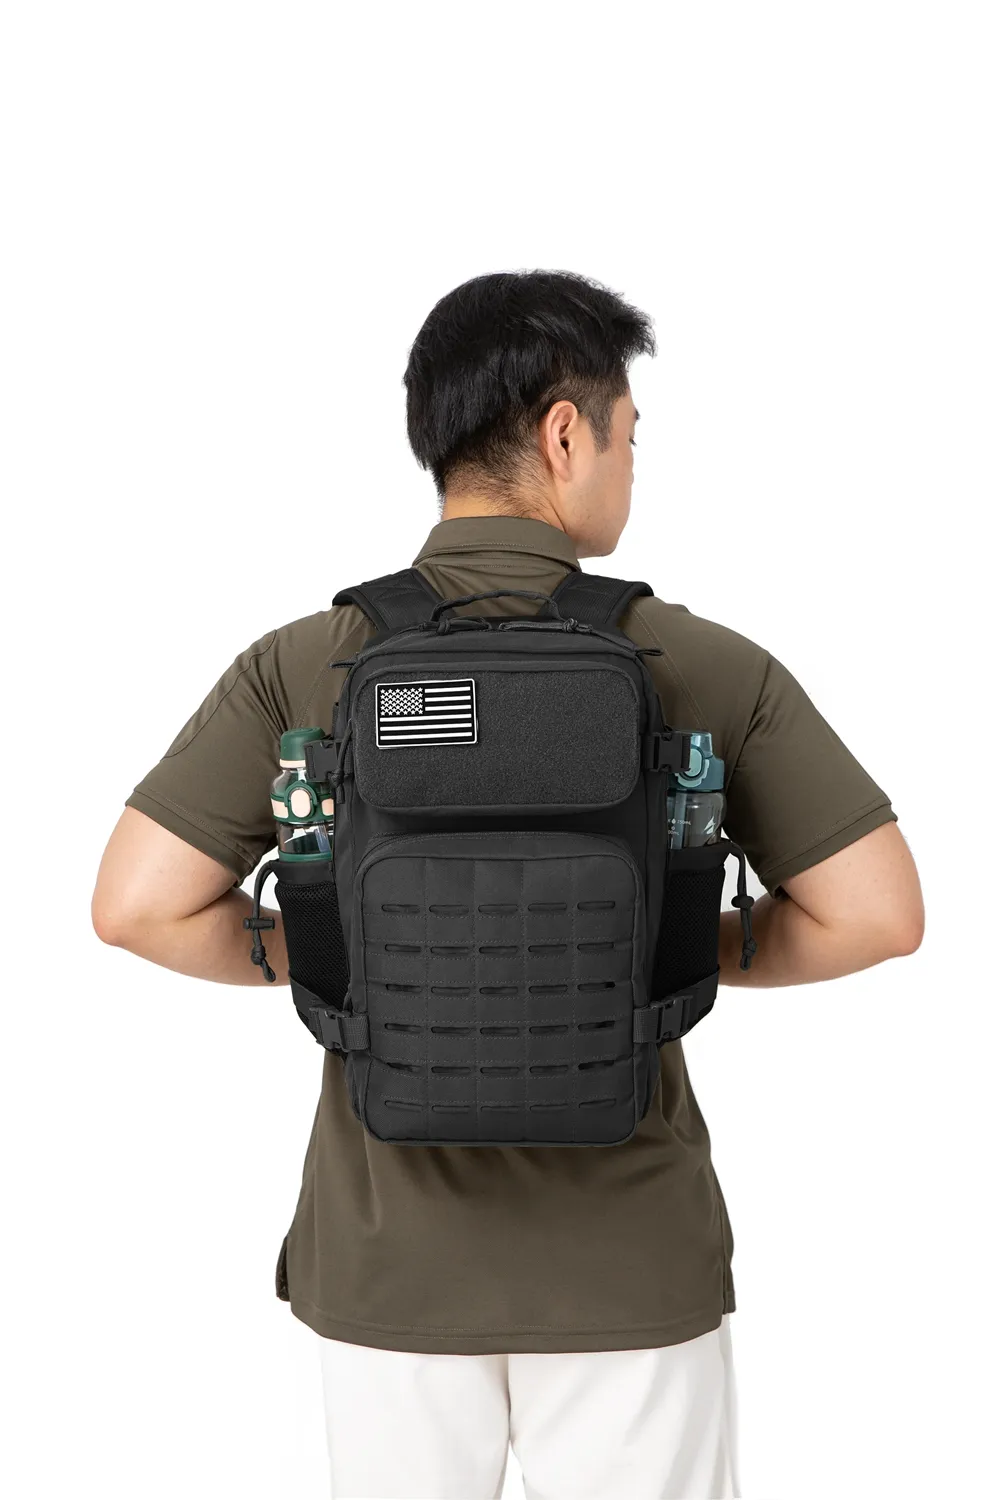 QT&QY 25L Military Tactical Backpacks for Men Army Laser Cut Molle Daypack Small Bug Out Bag Gym Rucksack with Dual Cup Holders